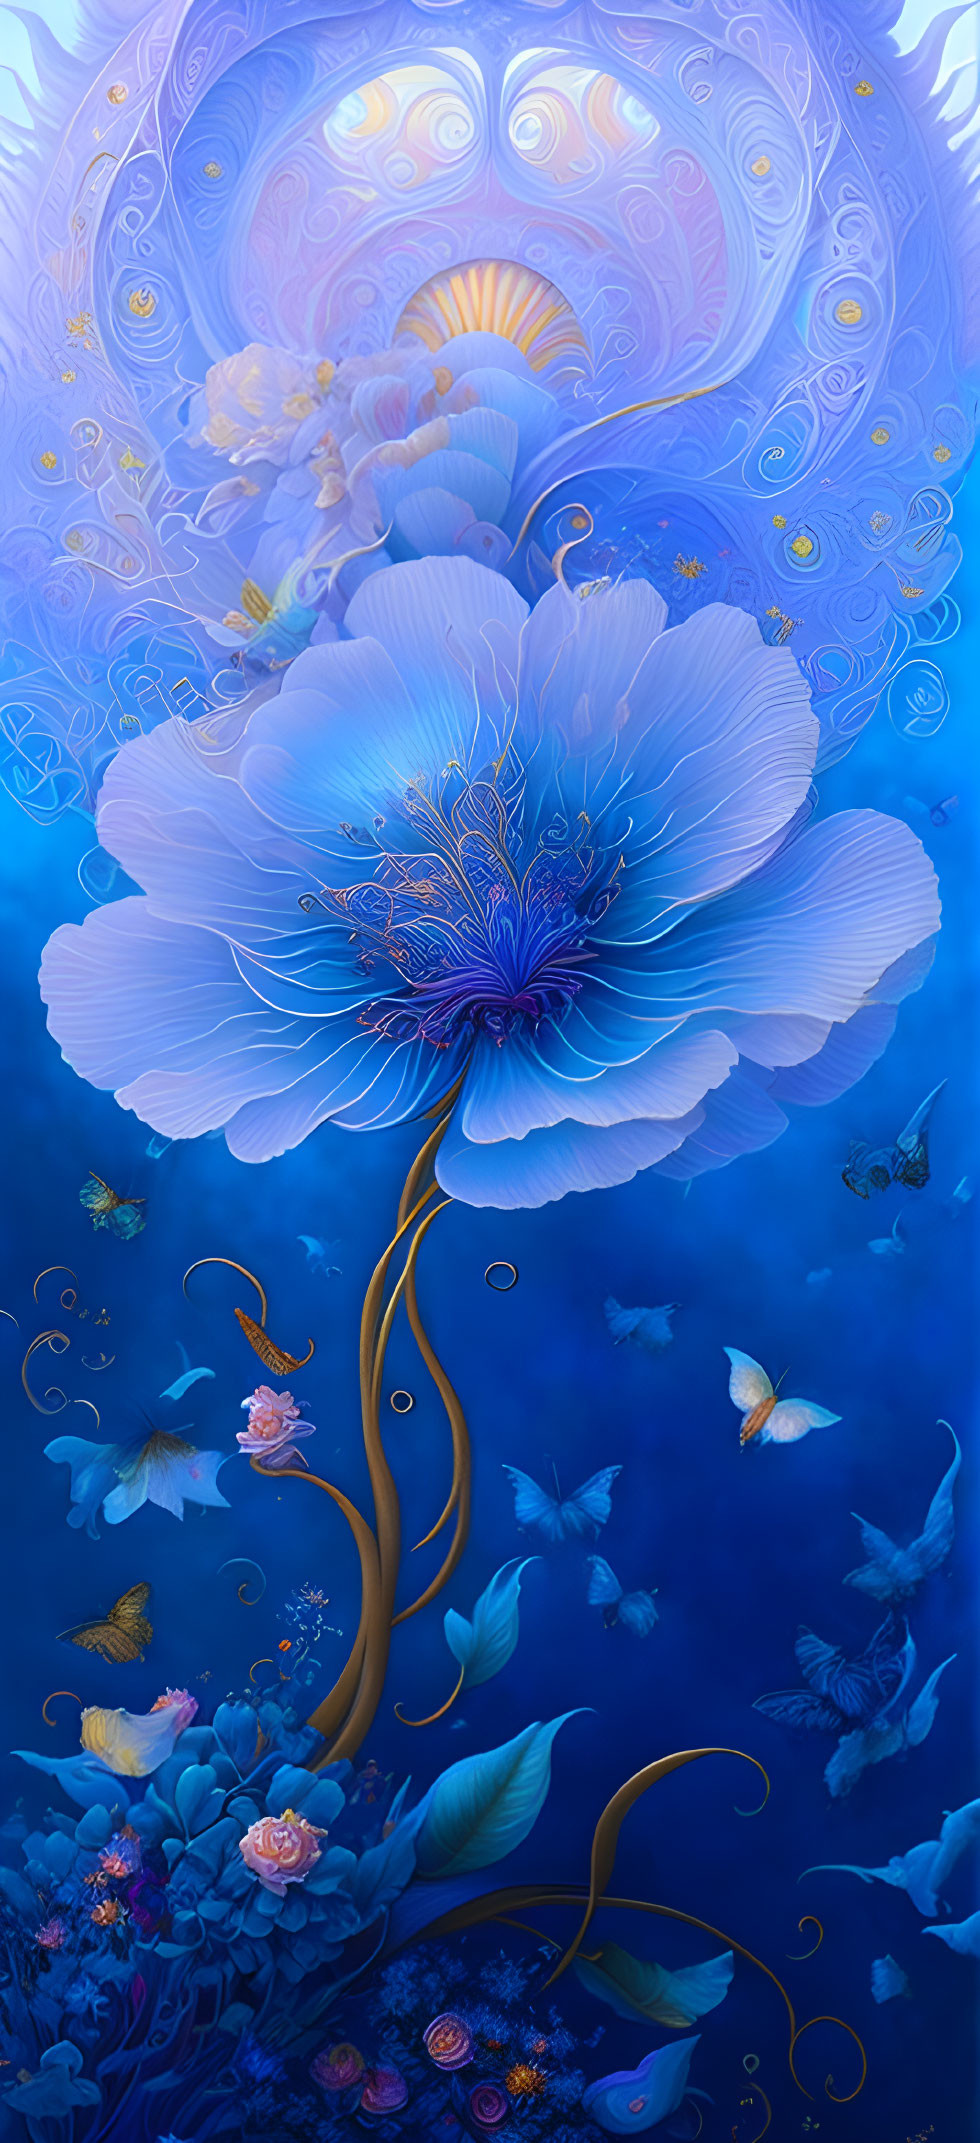 Detailed digital artwork of large blue flower with golden stems, fish, and swirling patterns.